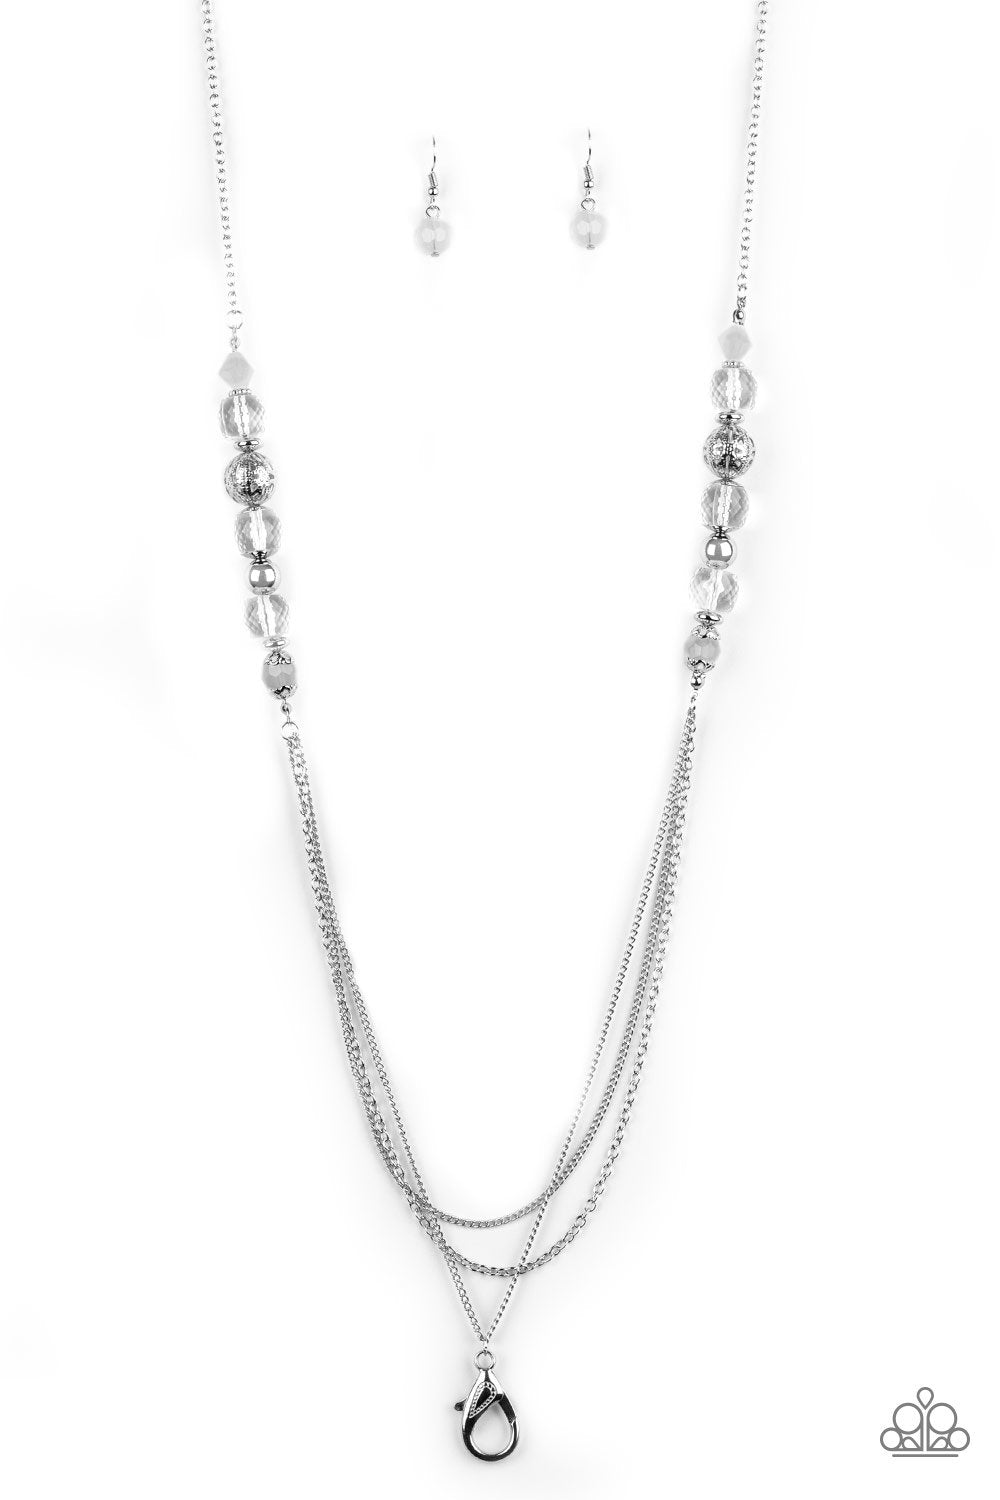 Native New Yorker White Lanyard Necklace - Paparazzi Accessories - lightbox -CarasShop.com - $5 Jewelry by Cara Jewels